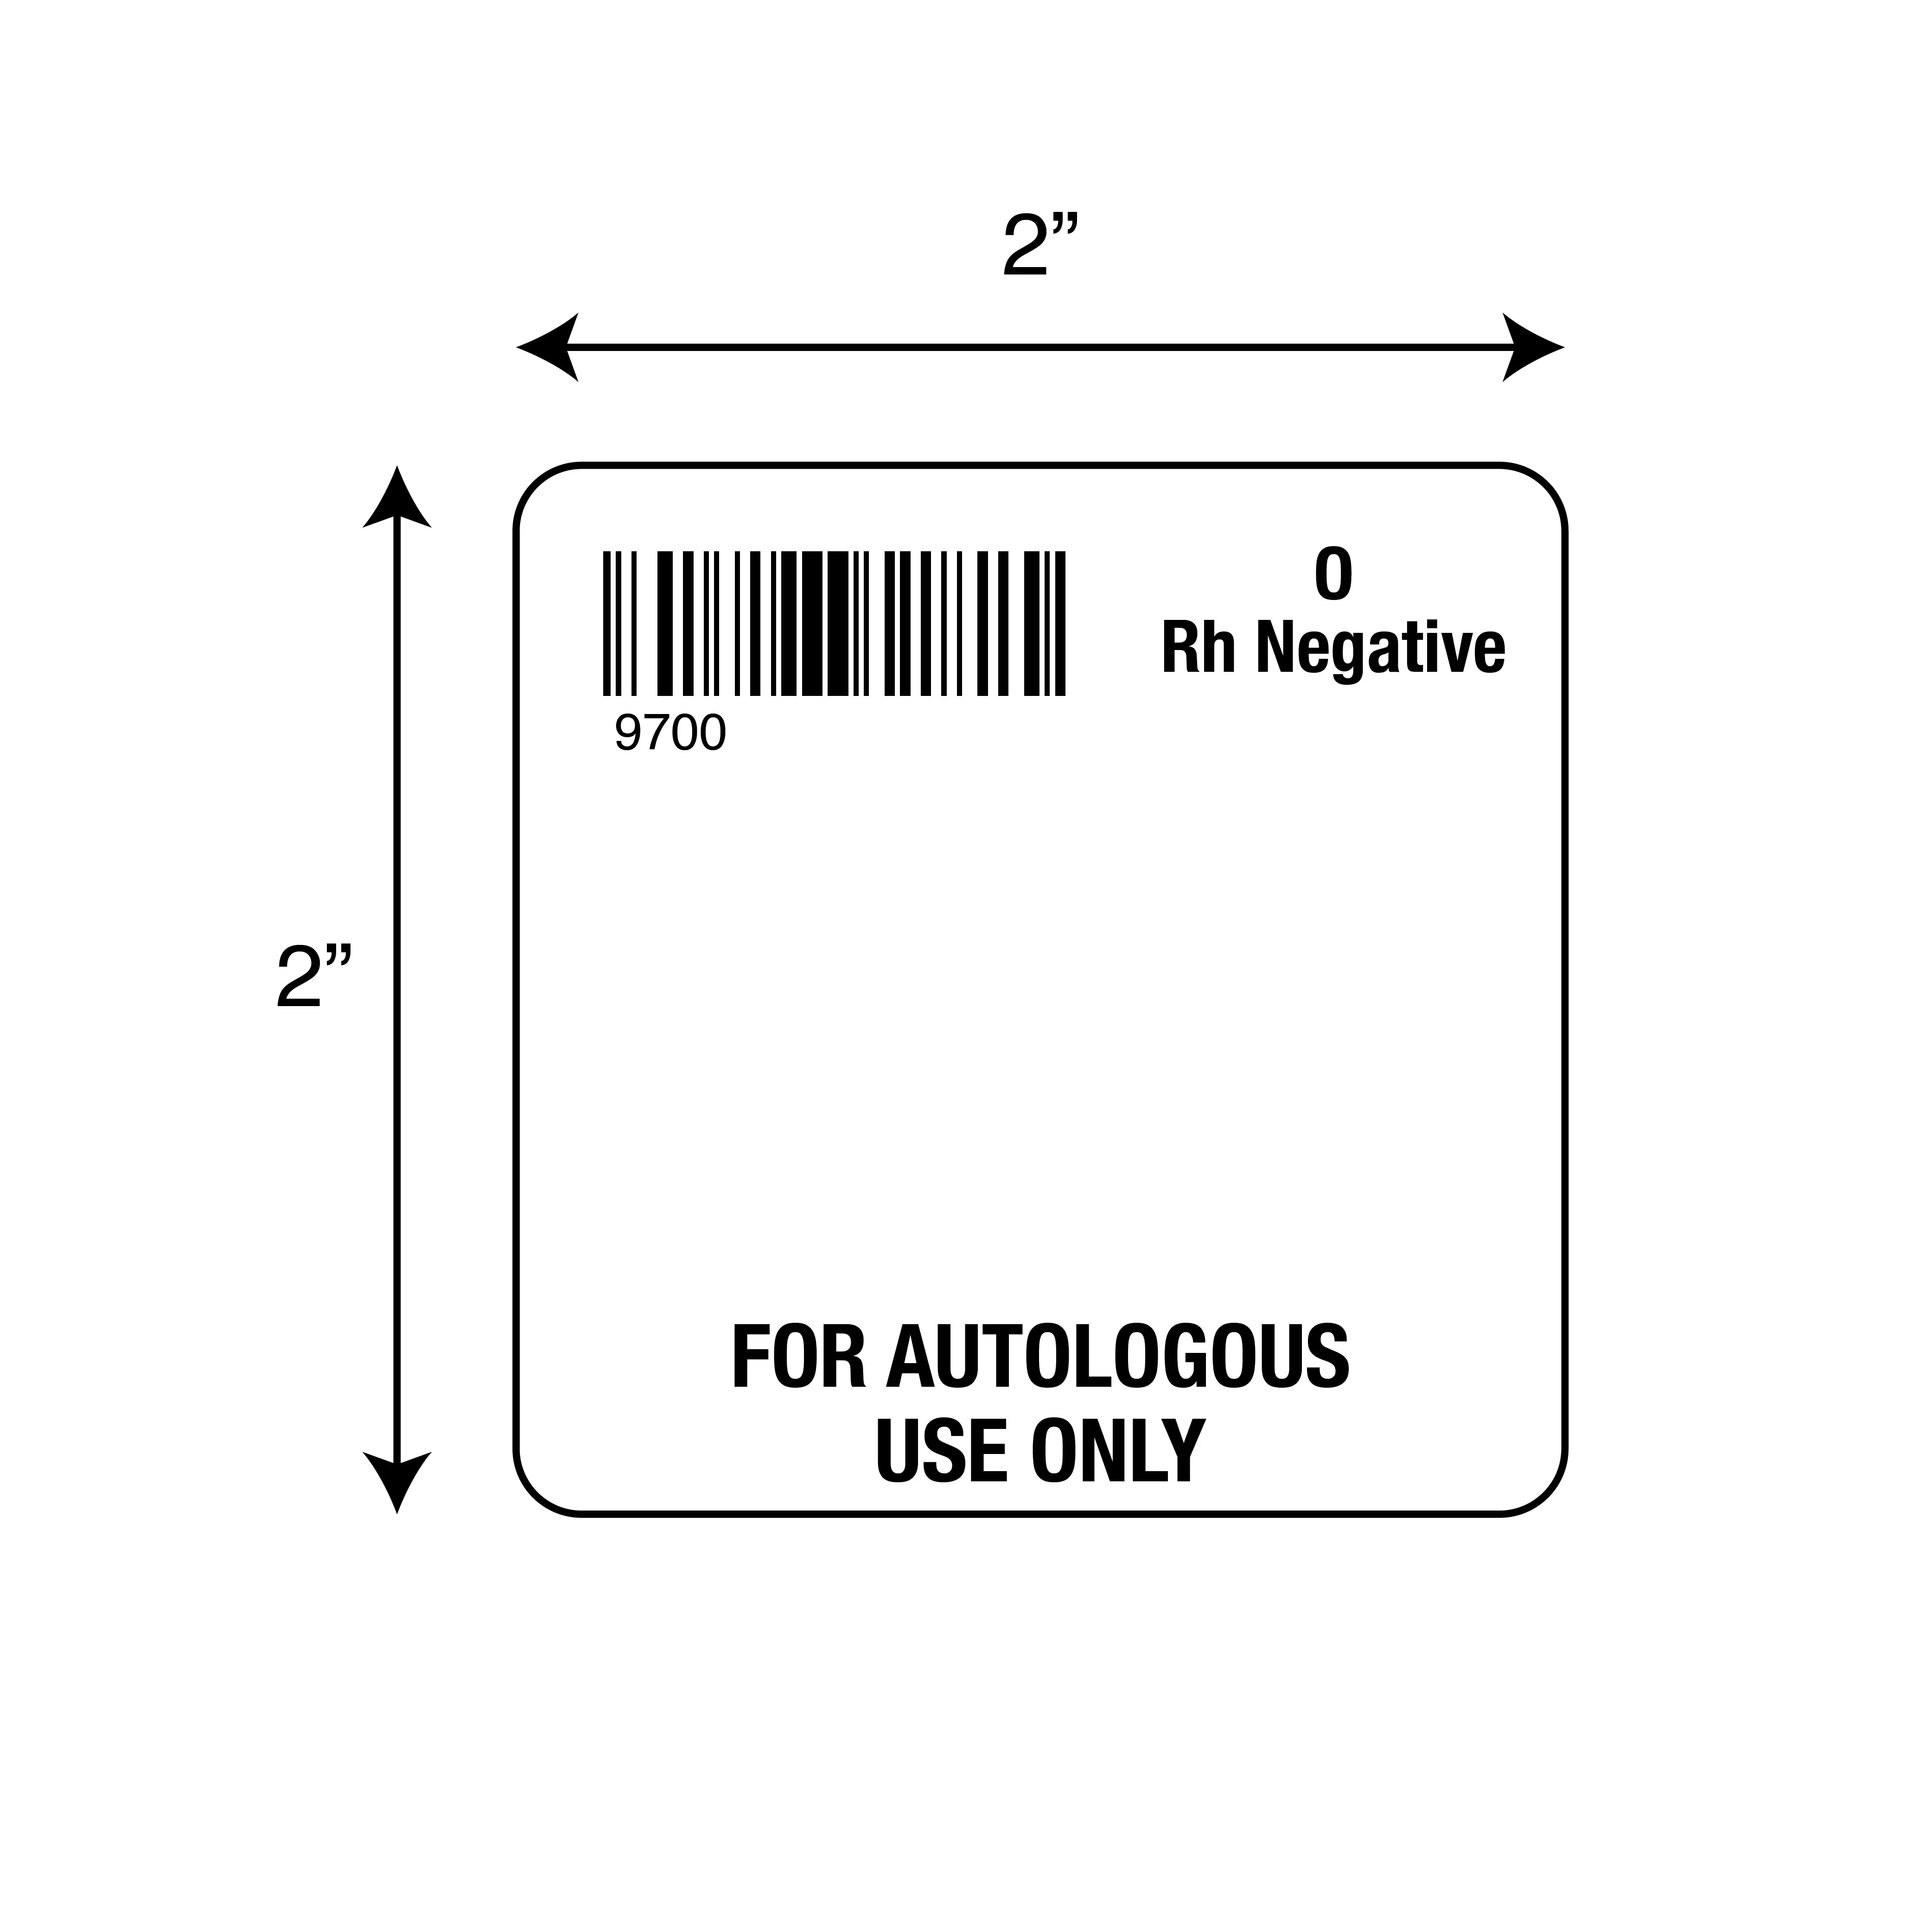 ISBT 128 O Rh Negative For Autologous Use Only